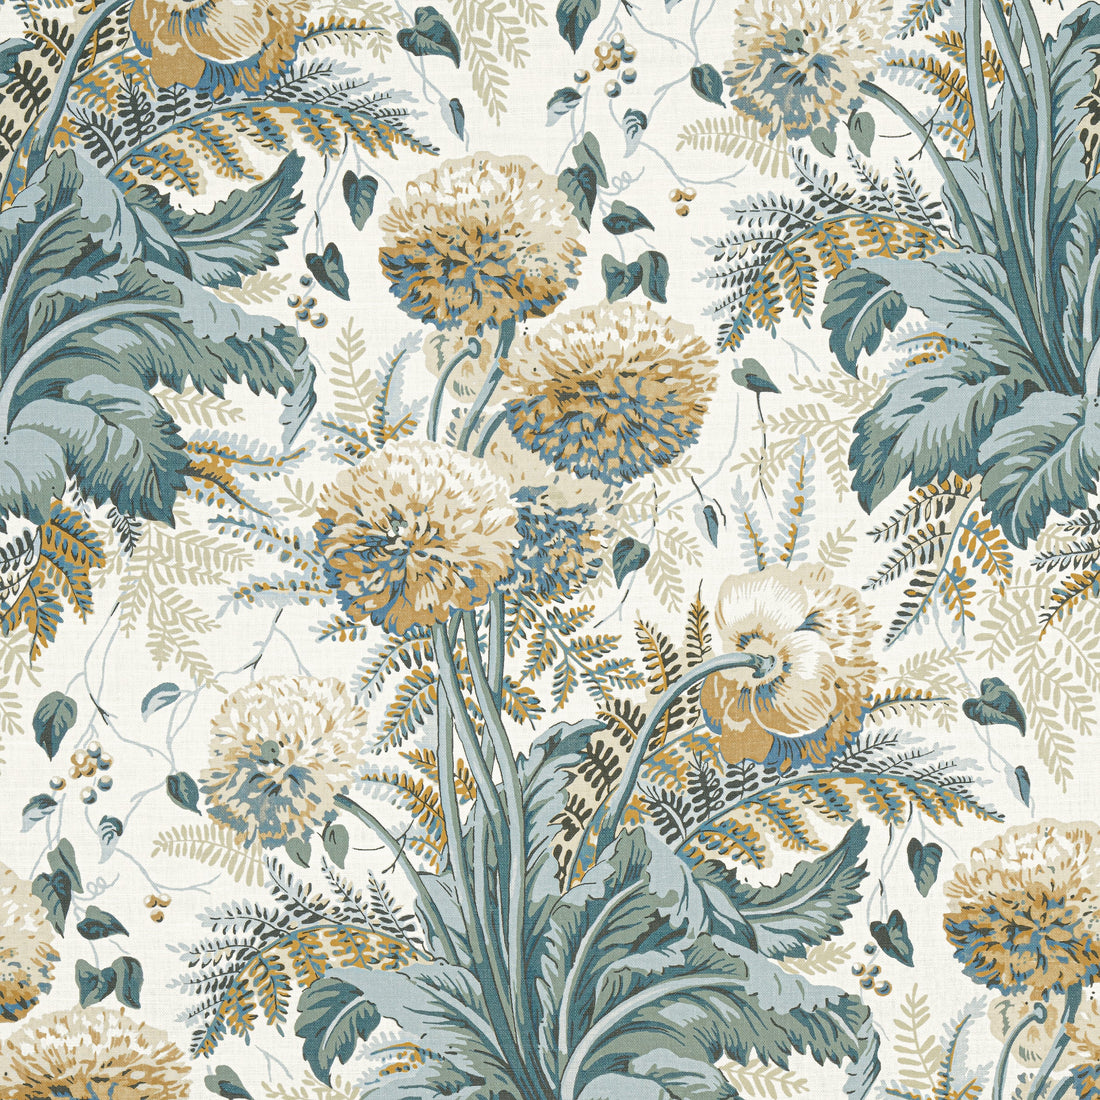 Dahlia fabric in Soft Gold on Cream color - pattern number AF24539 - by Anna French in the Devon collection